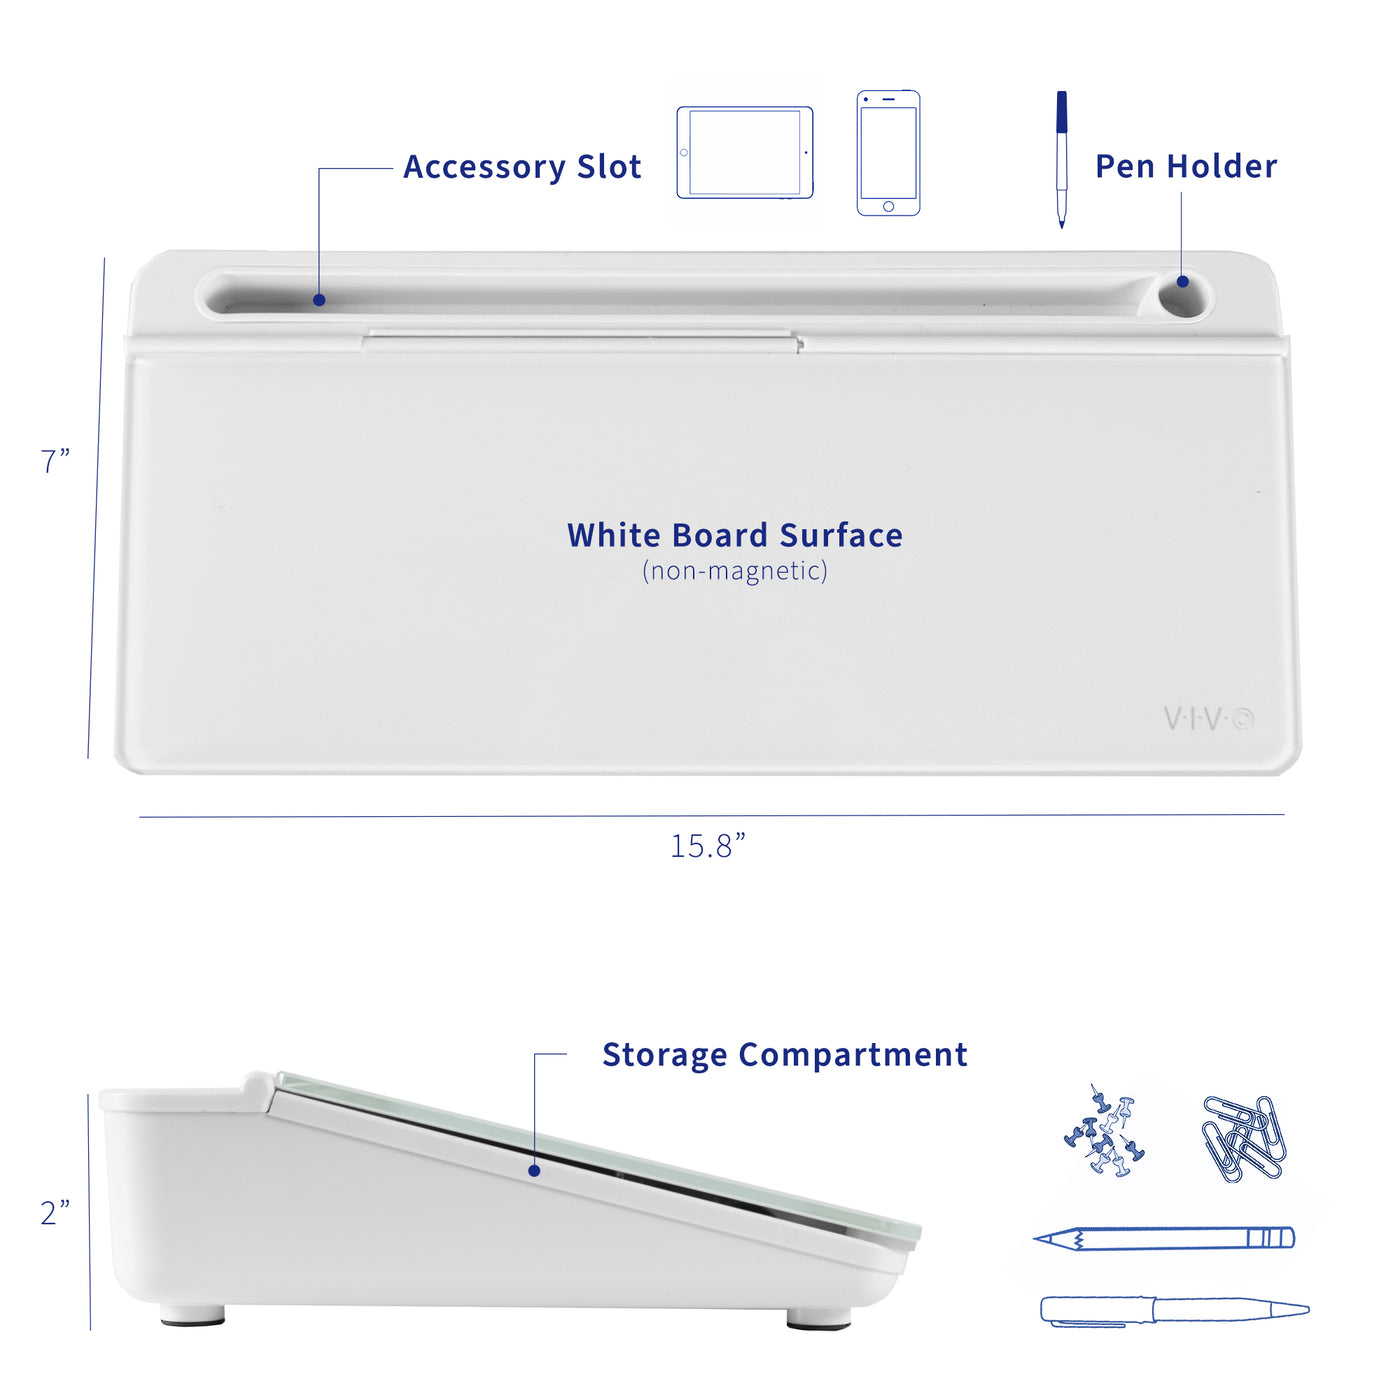 Whiteboard storage compartment with a dry-erase and magnetic surface.